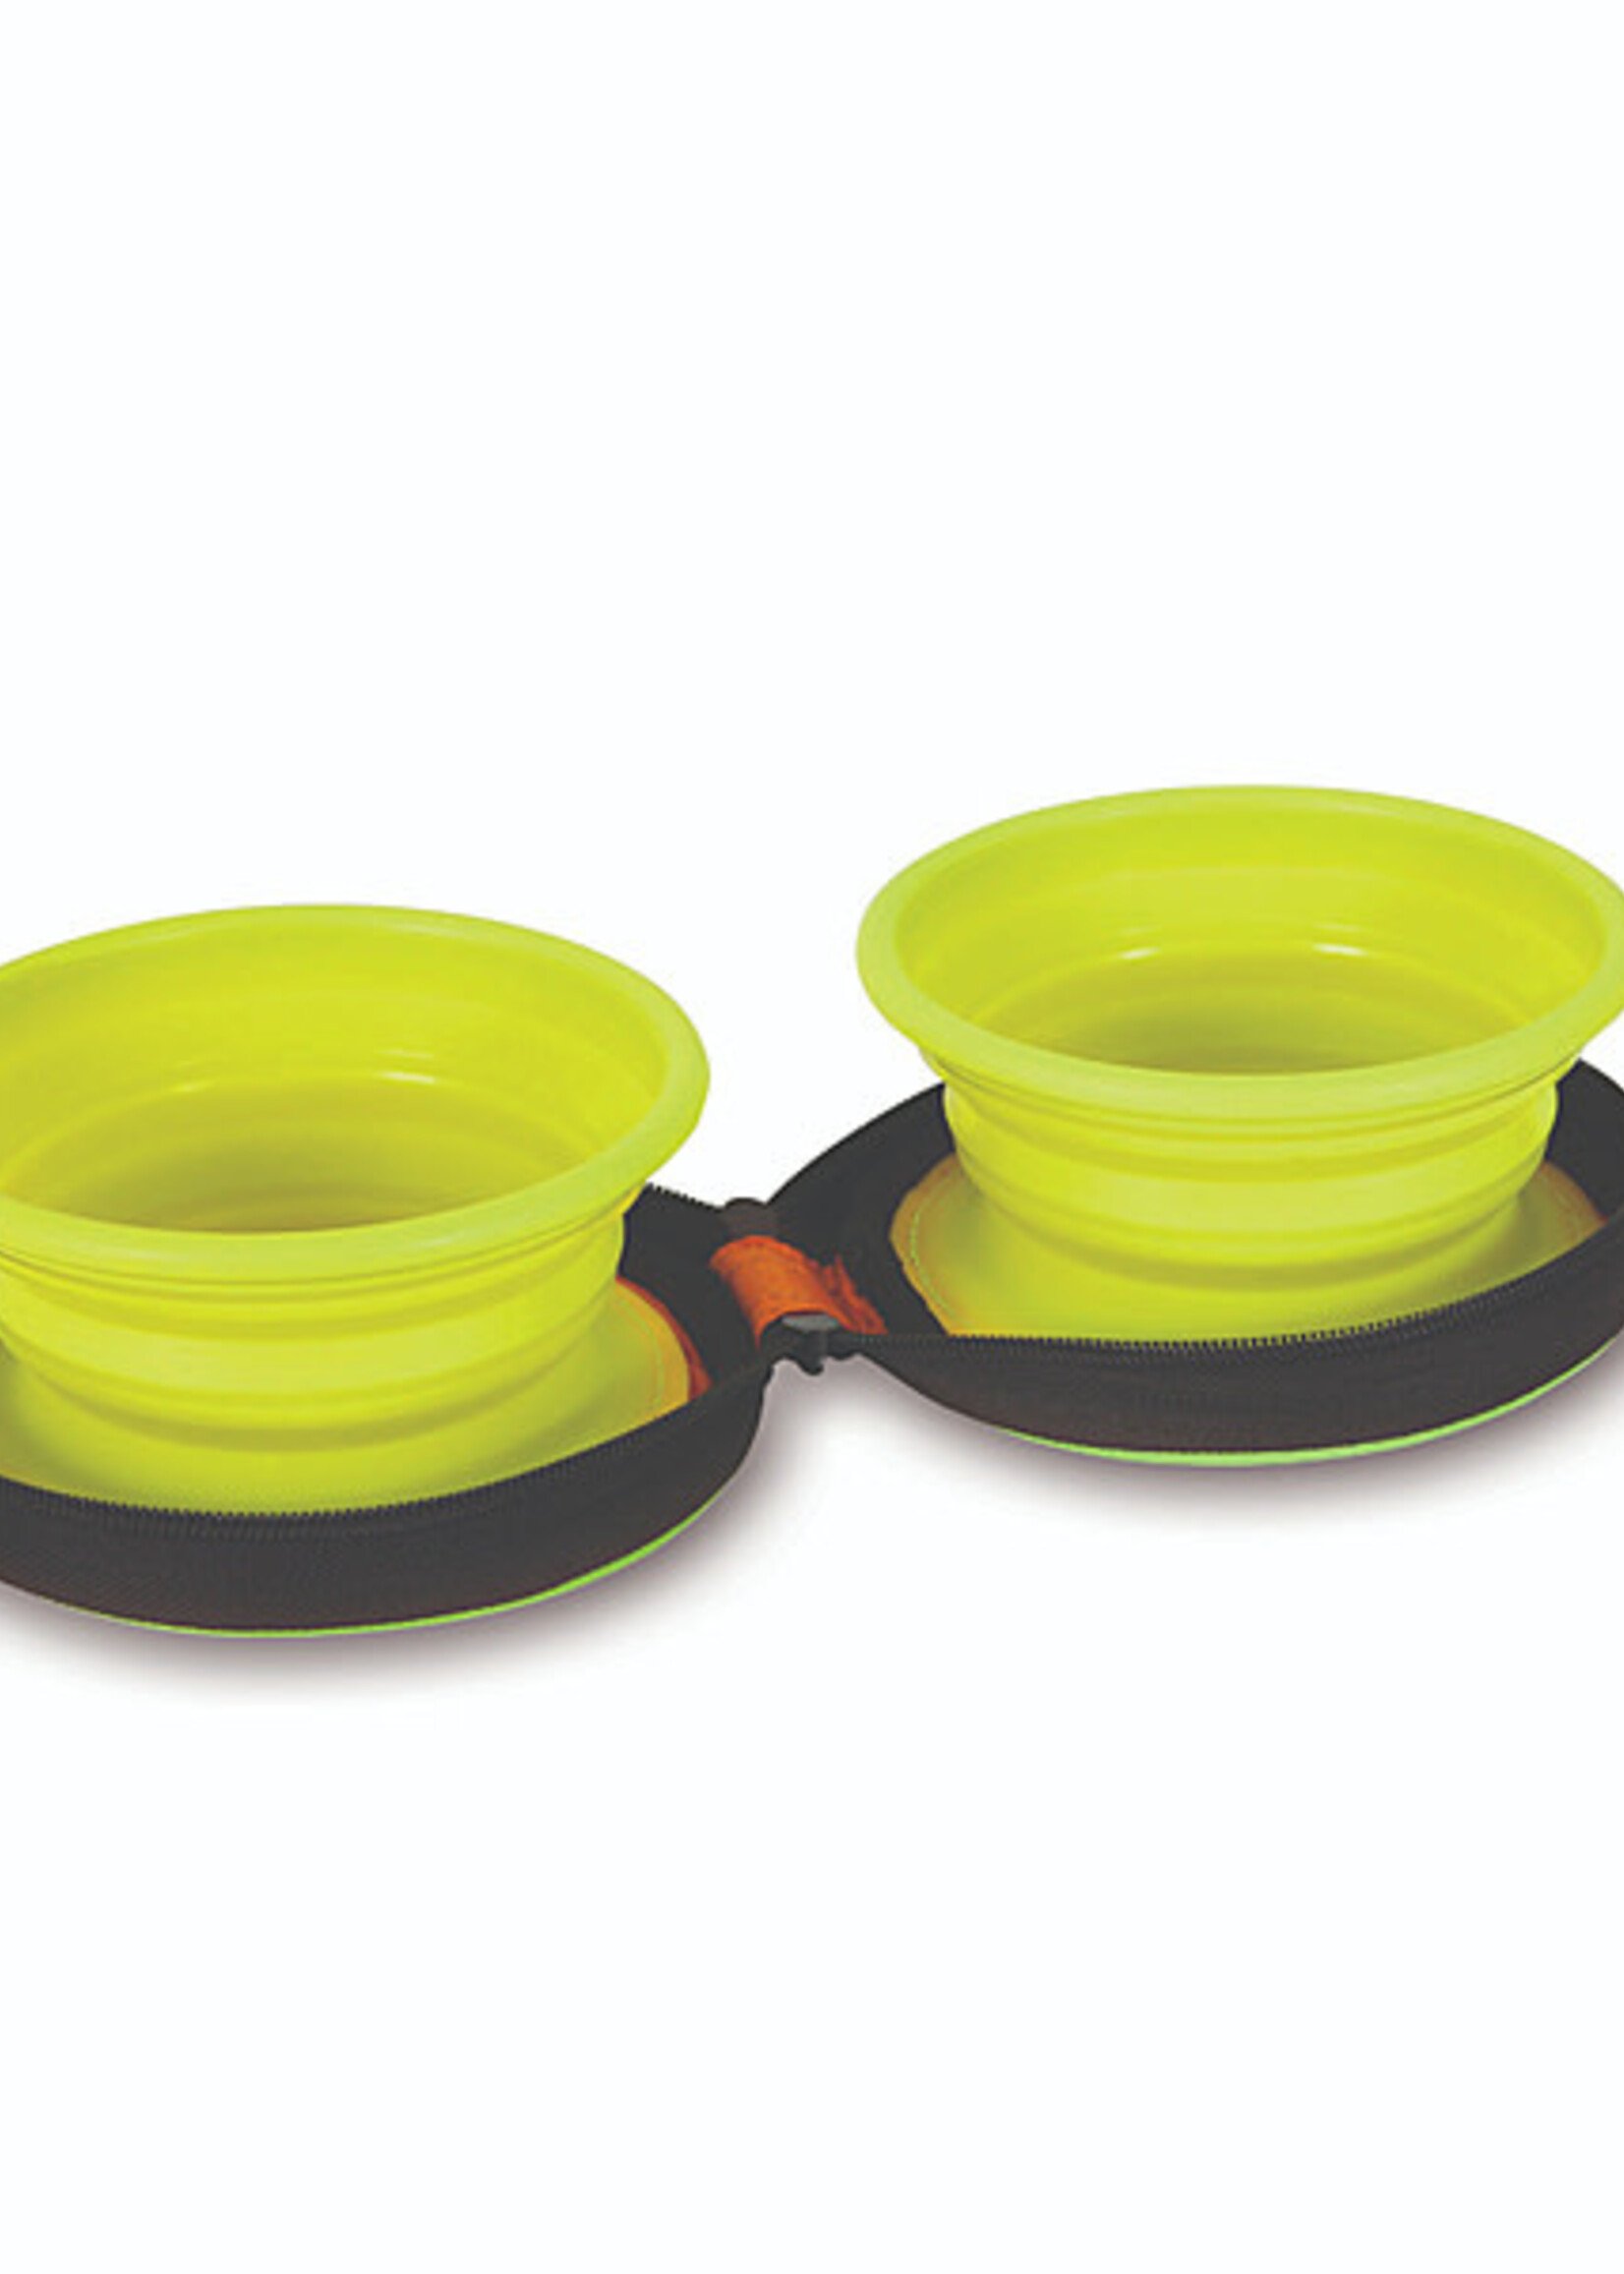 PetMate Silicone Travel Bowl Duo